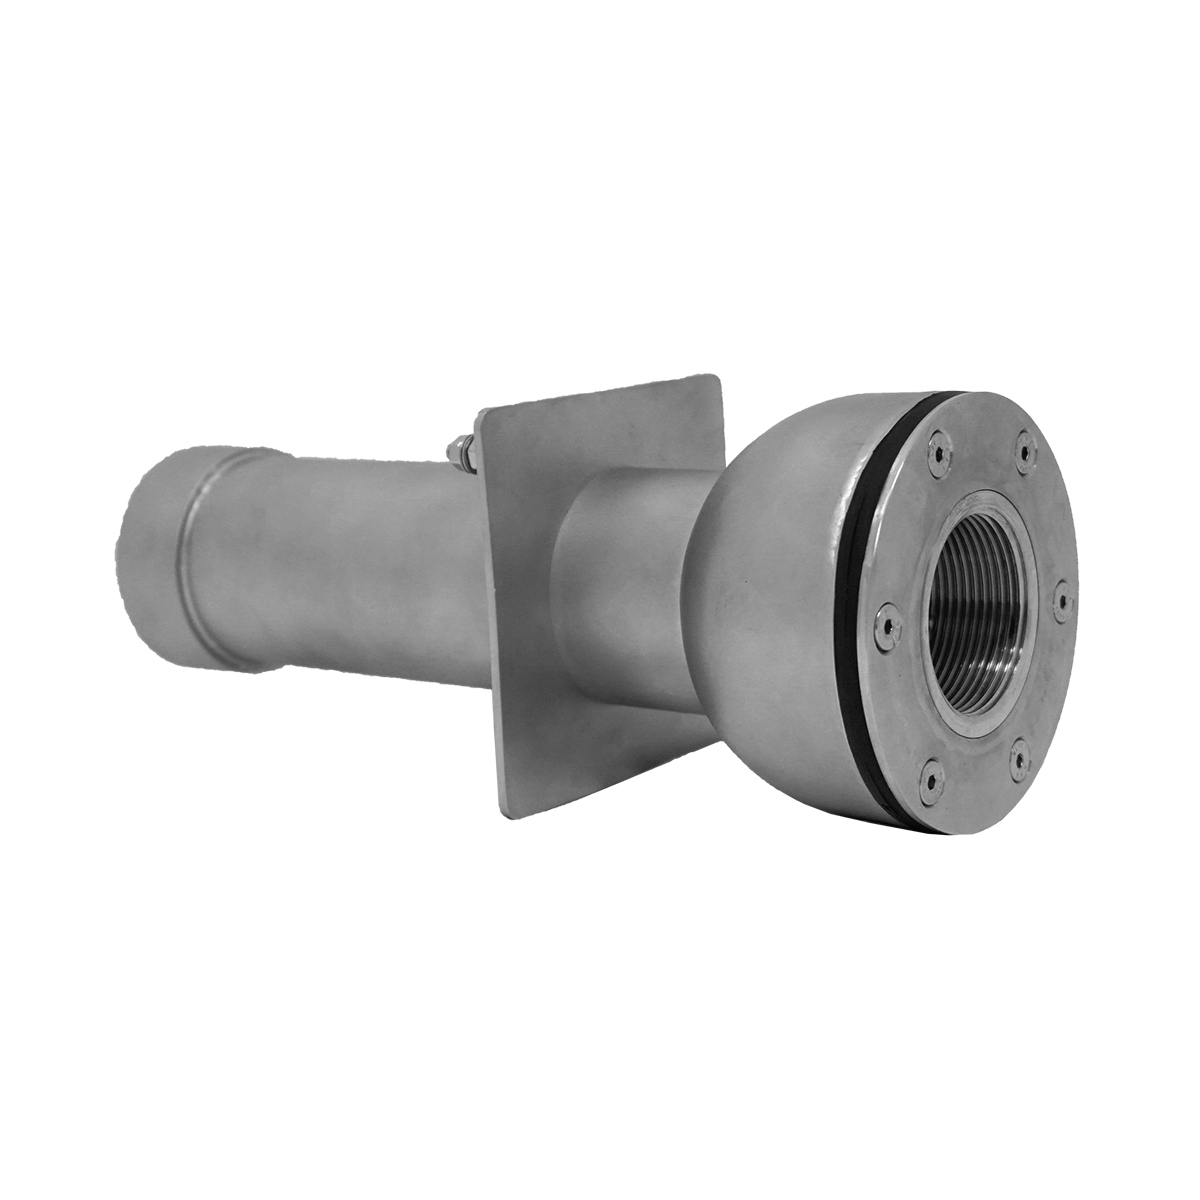 Ocean® wall conduit V4A PRO with water stop, thread, l=250 mm, 2" female thread, for liner, concrete and tile pools Ocean® wall conduit V4A PRO with water stop, thread, l=250 mm, 2" female thread, for liner, concrete and tile pools